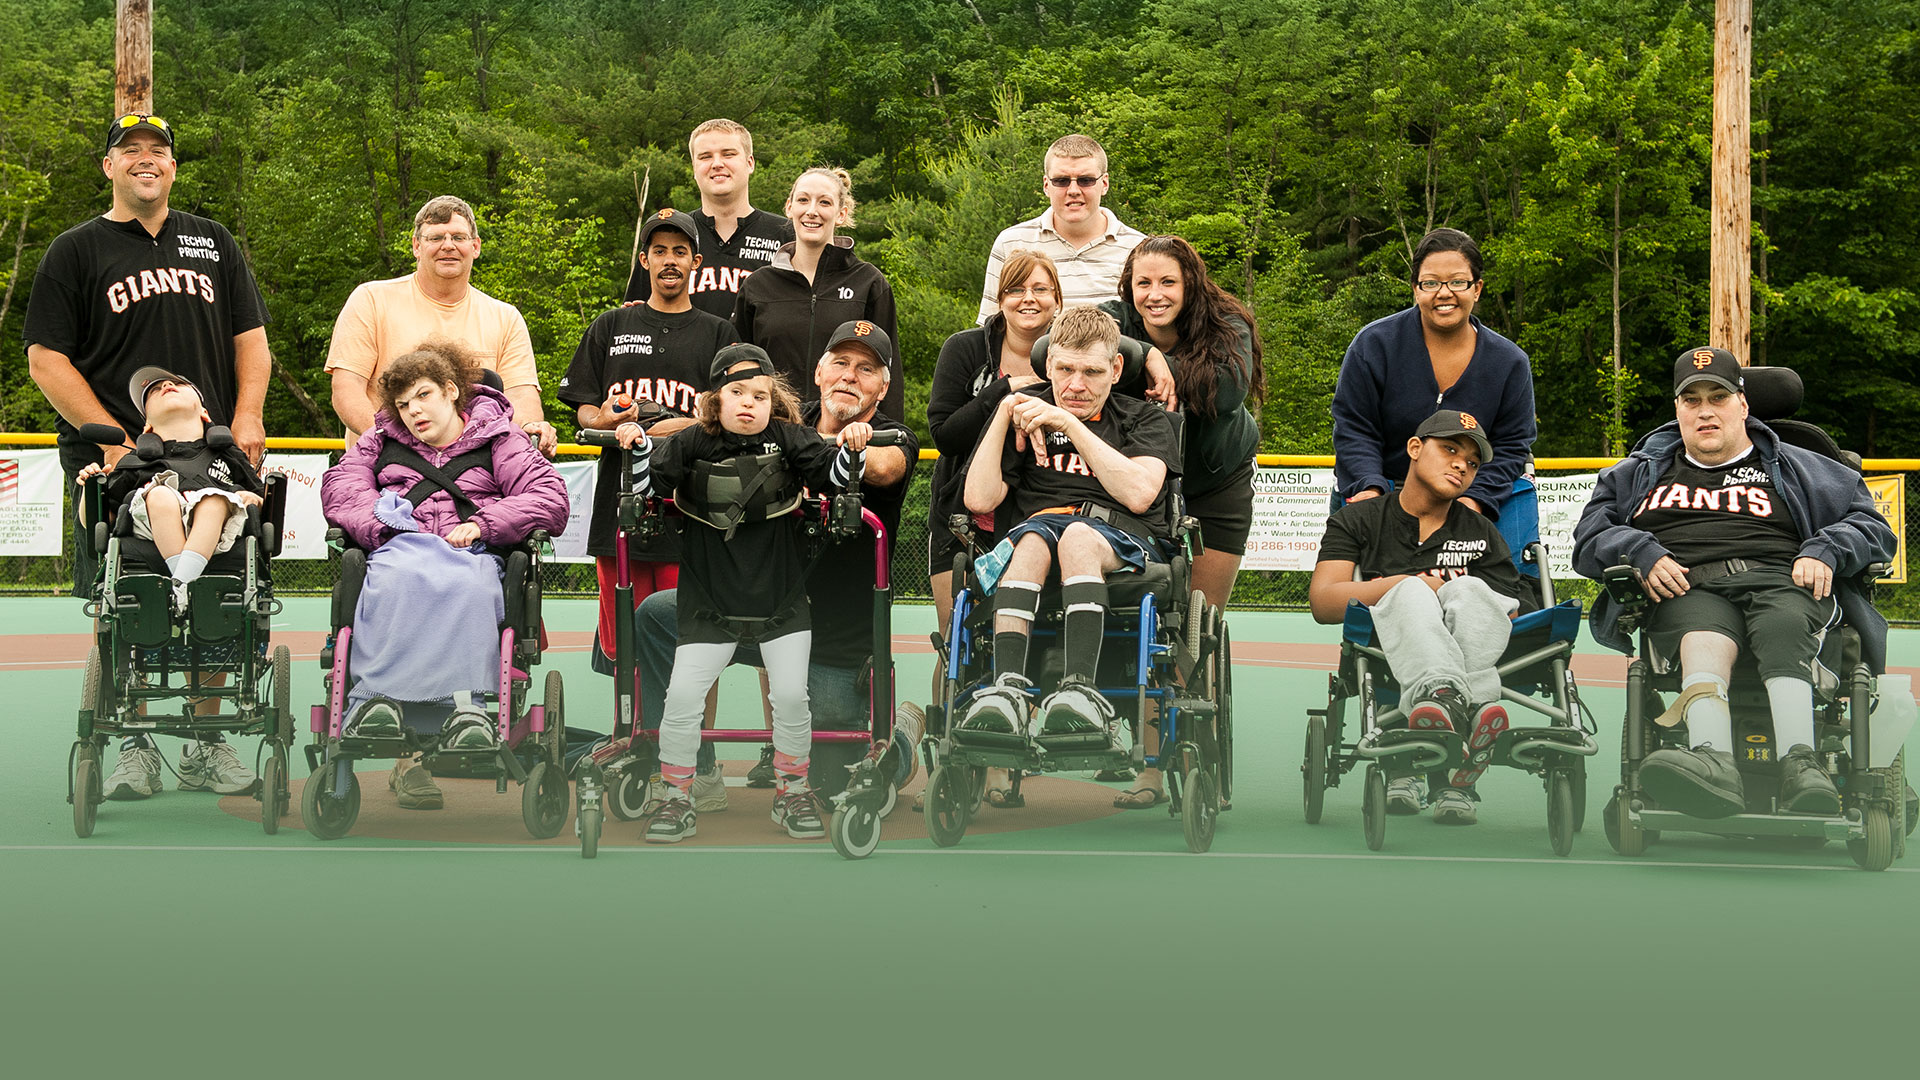 Miracle League Team Photo on Field